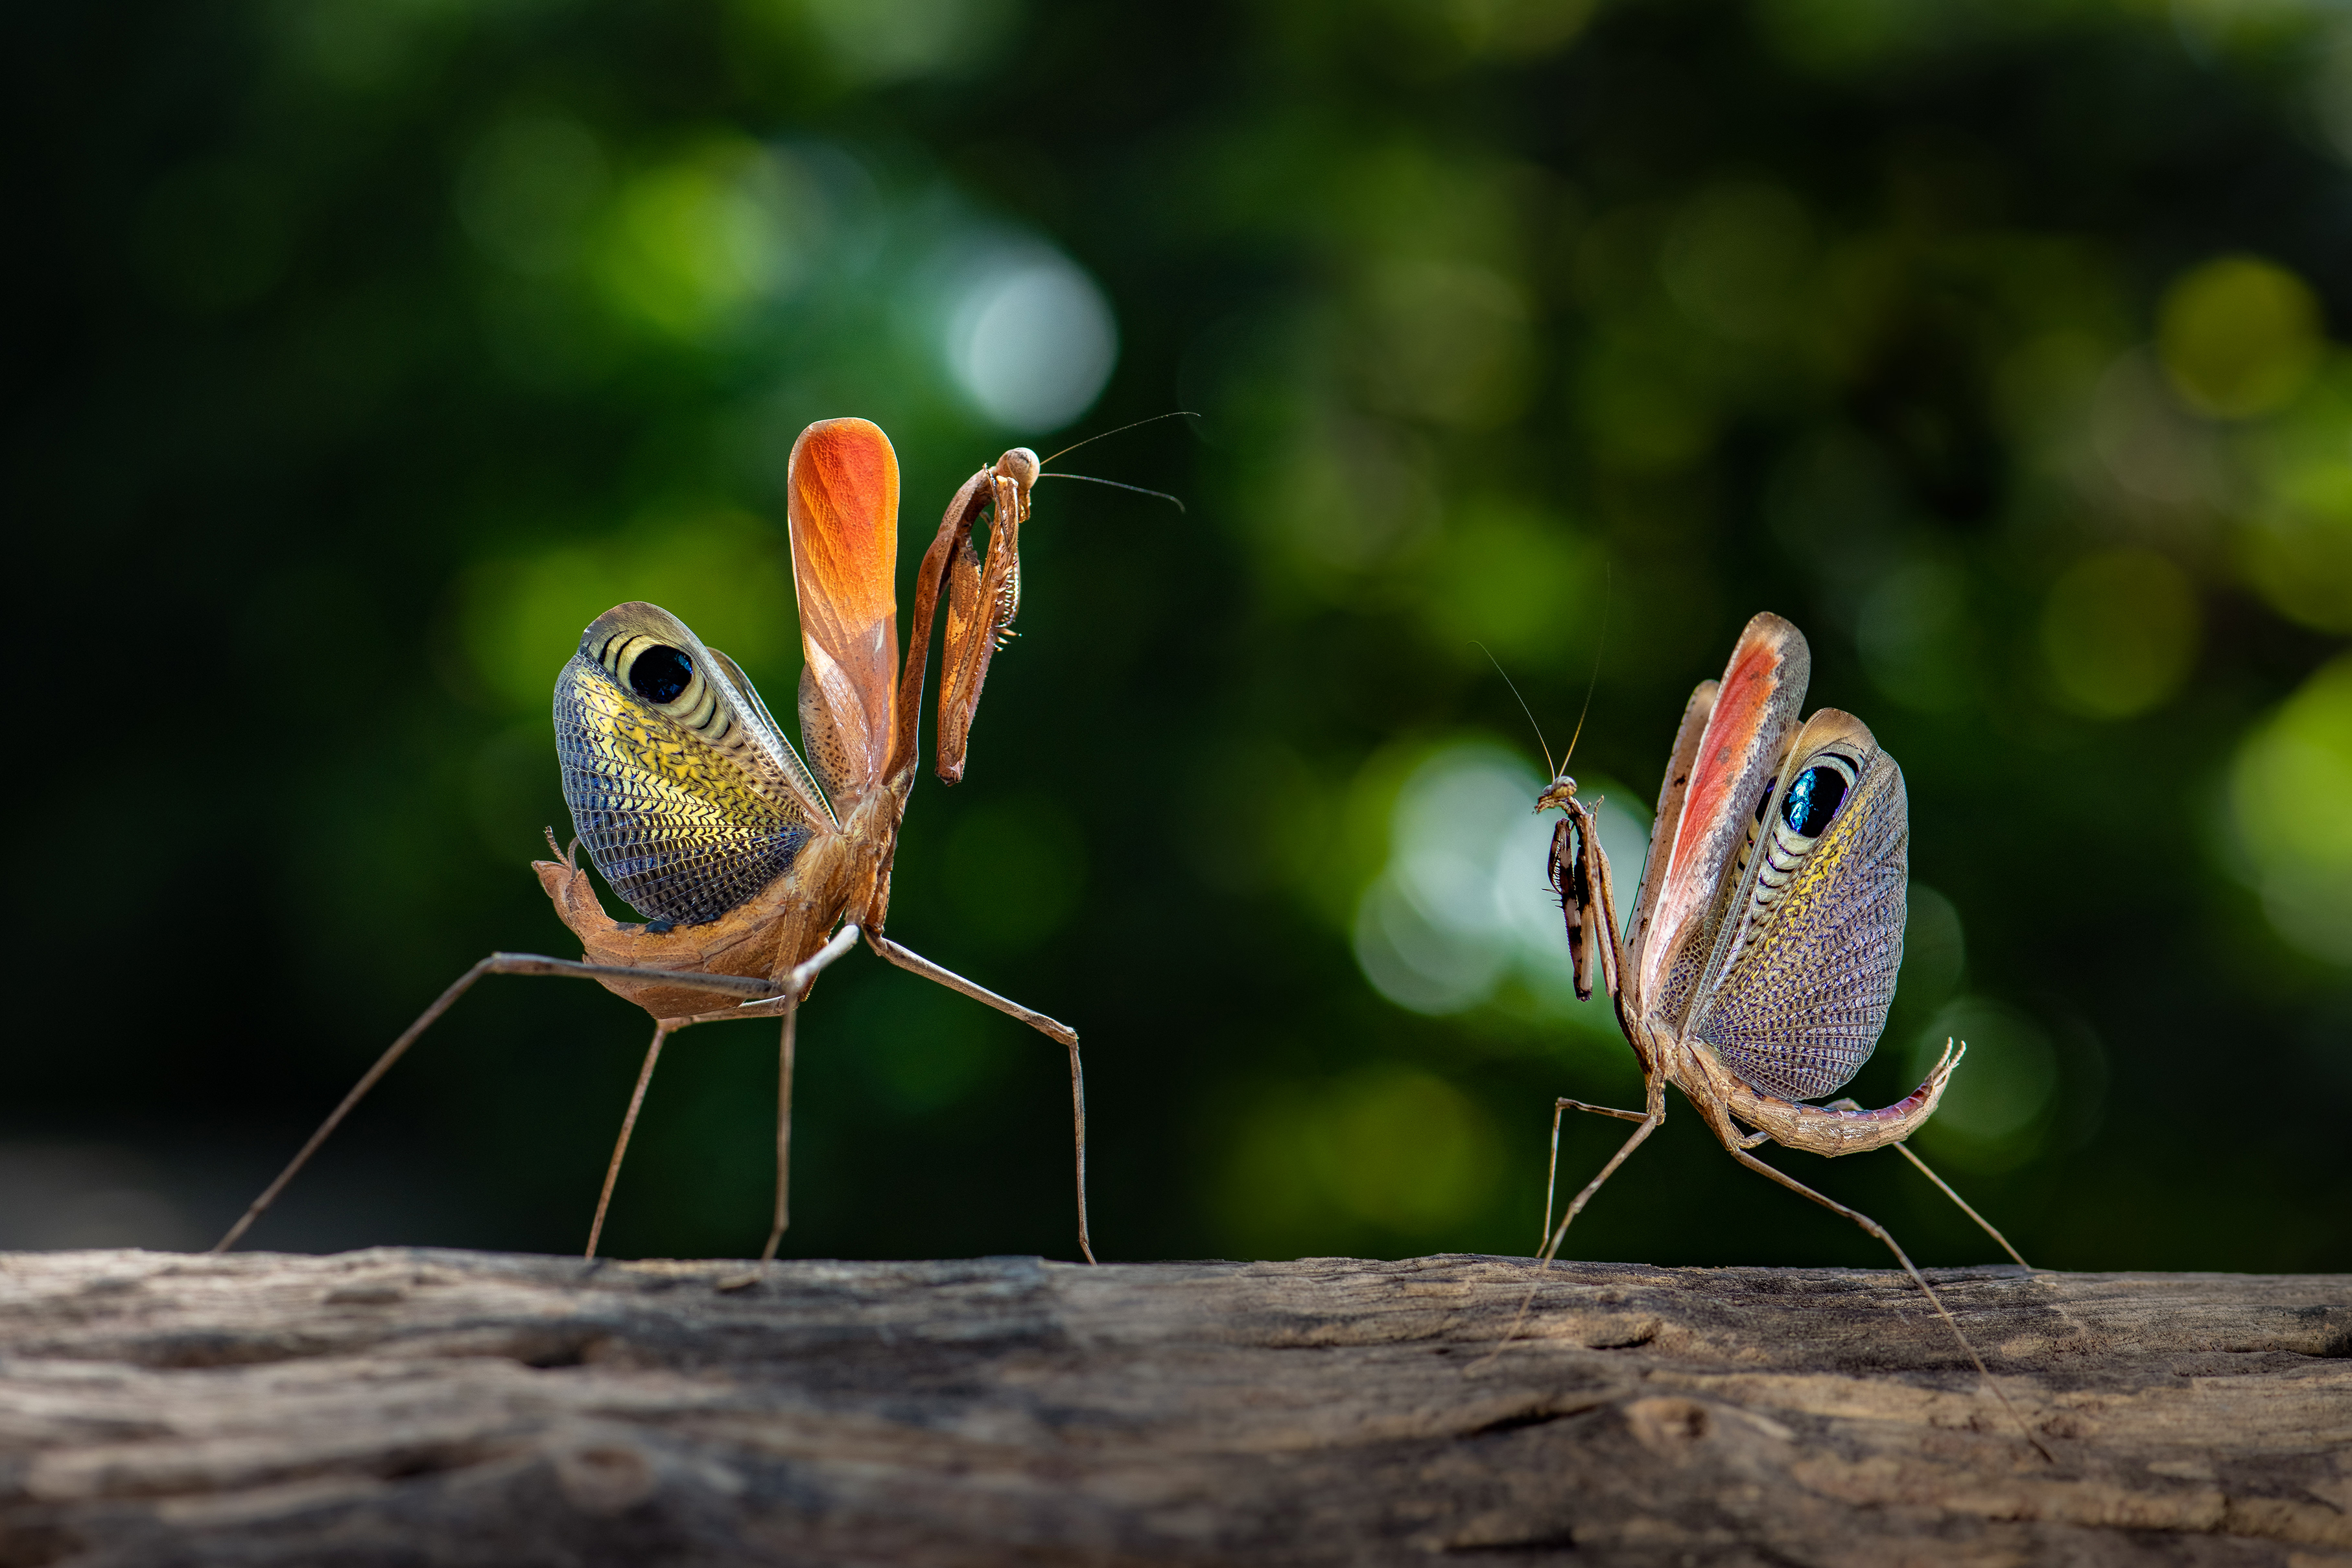 A male and female praying mantis facing each other on a piece of wood